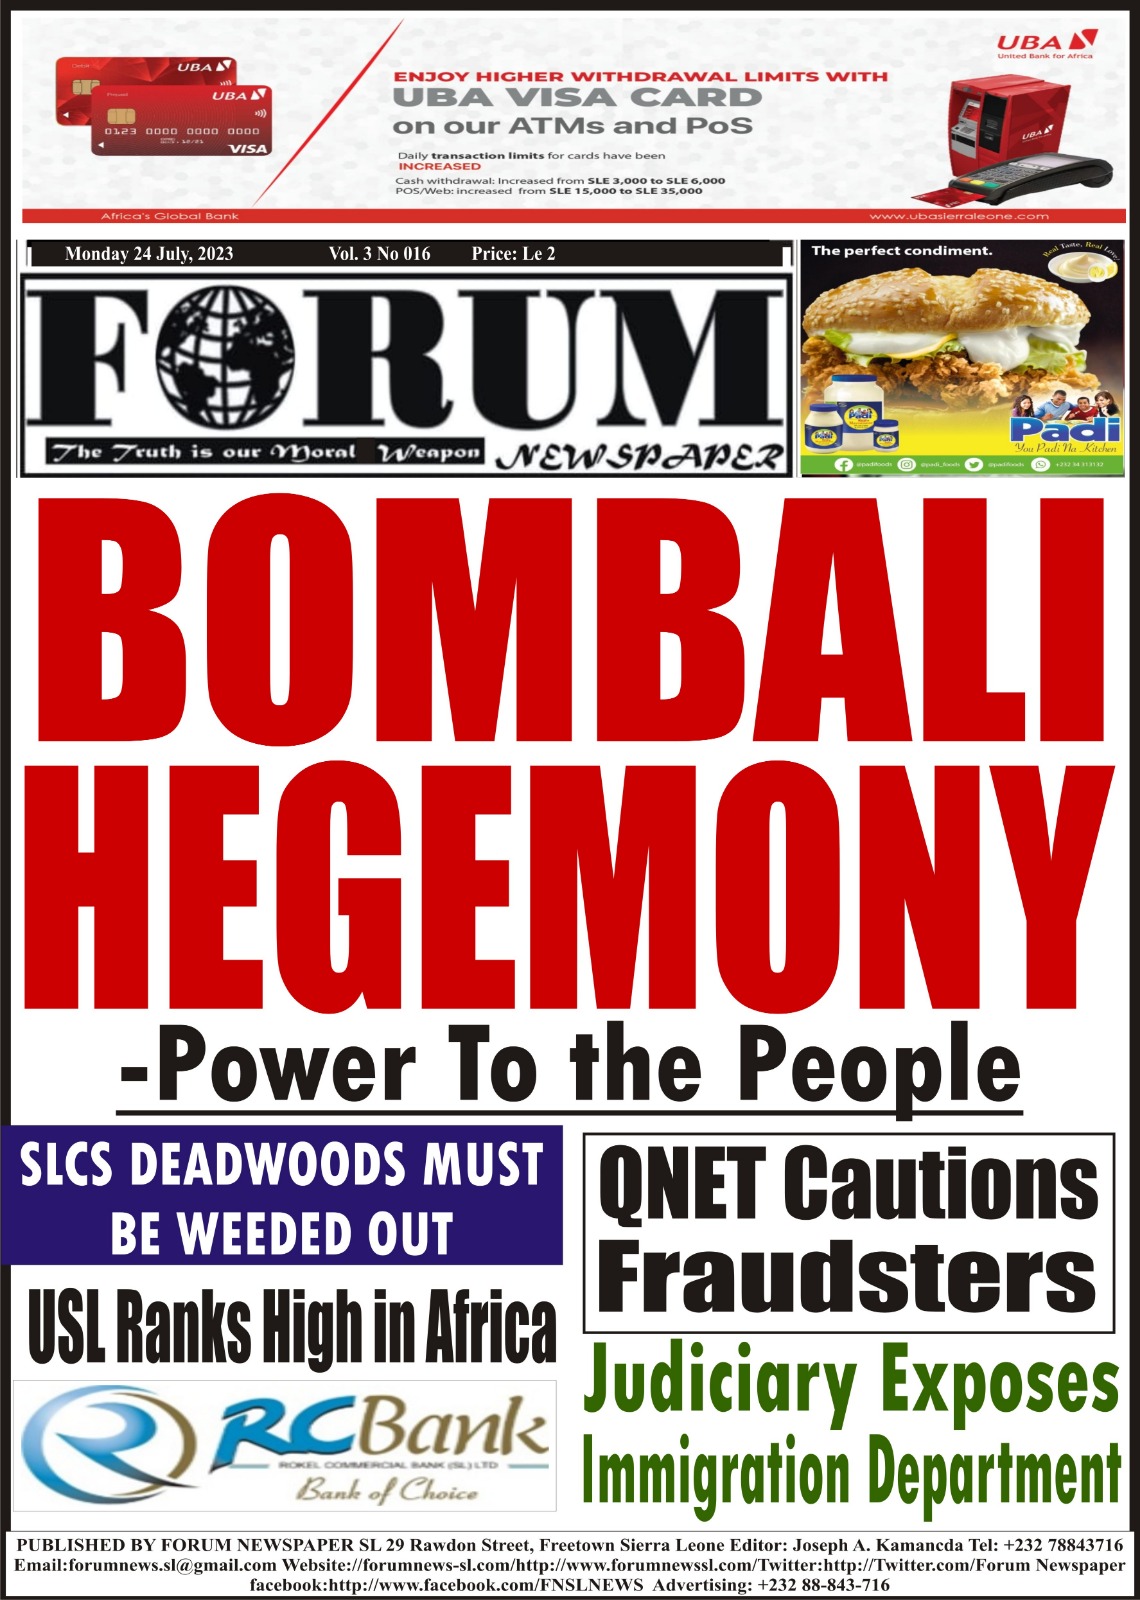 THE BOMBALI HEGEMONY  – Power To the People